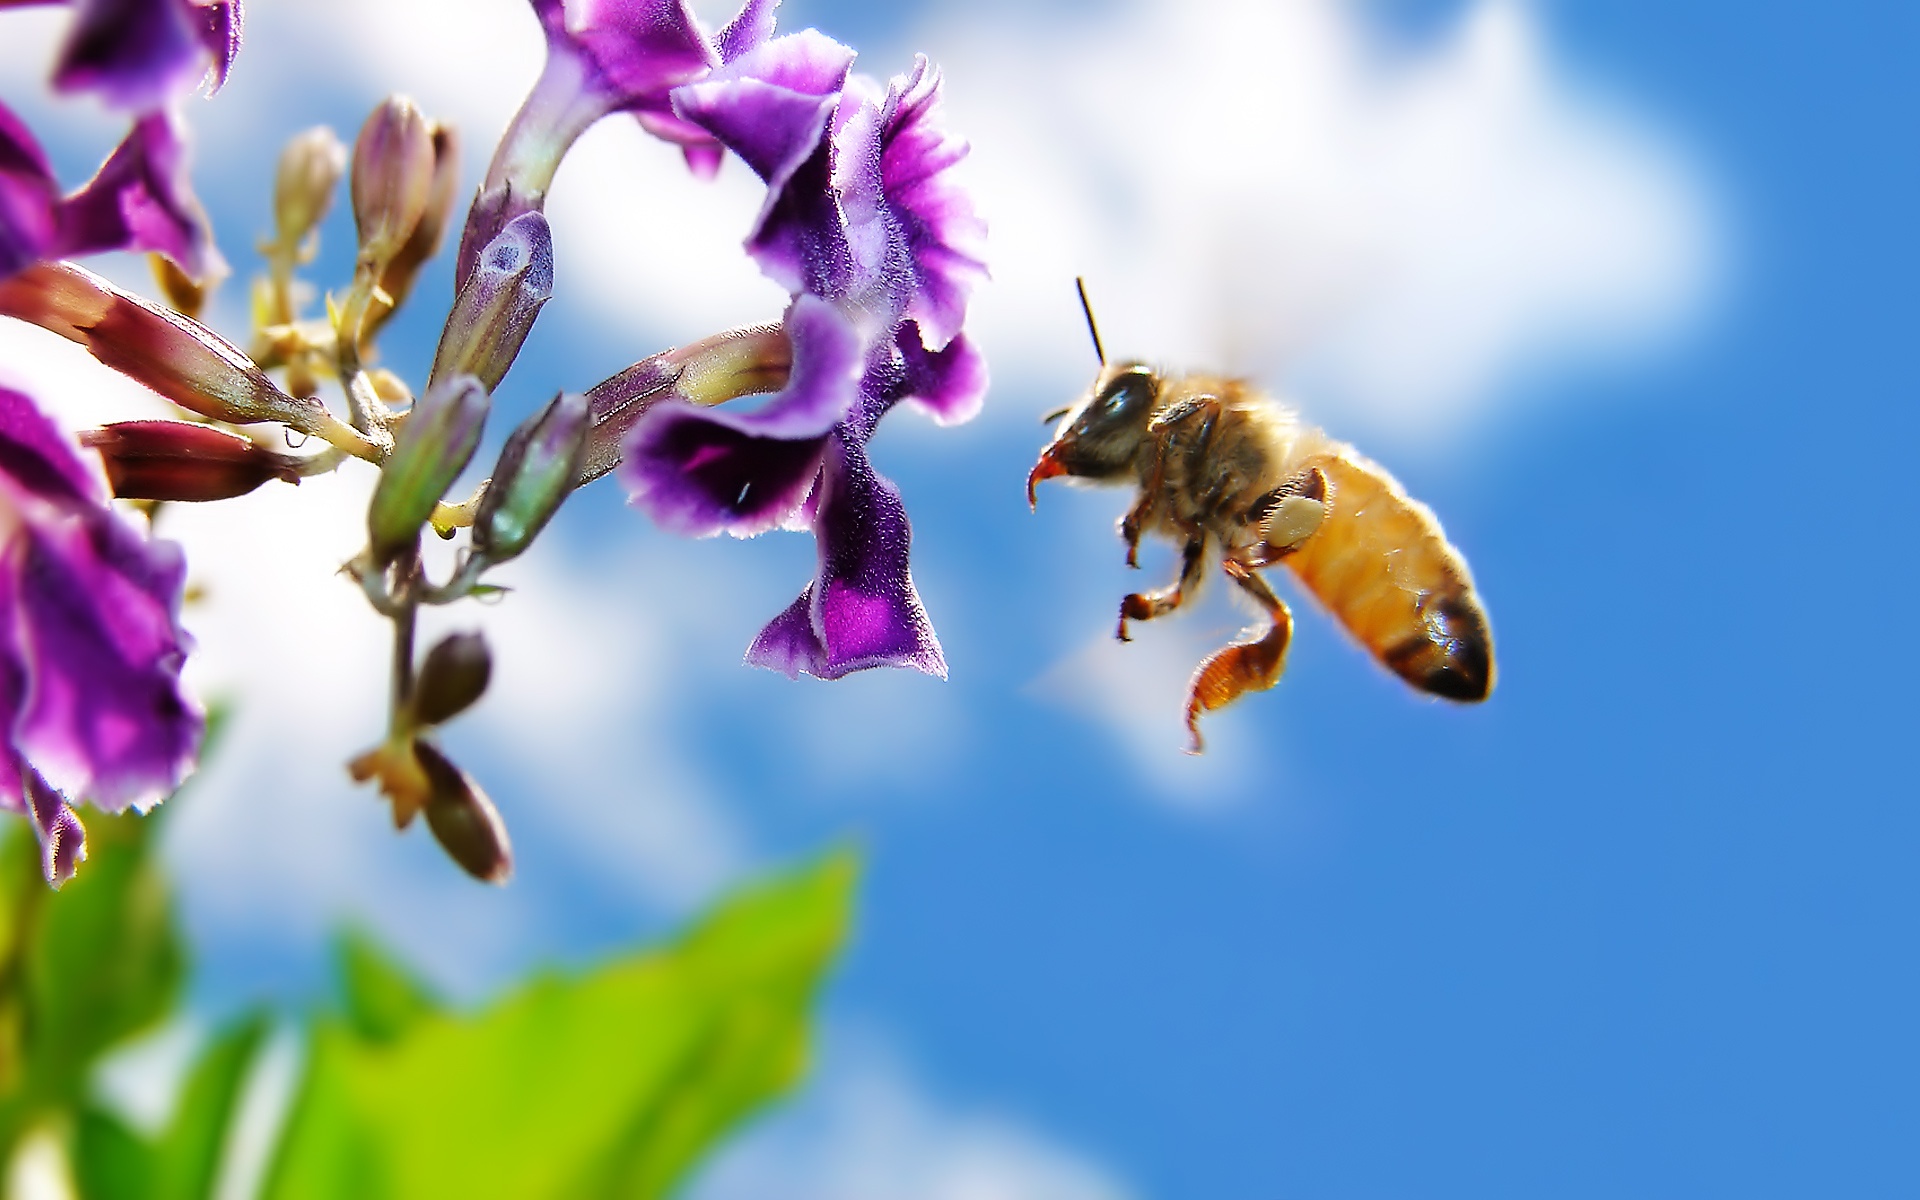 Bee on Flower Widescreen Wallpapers in jpg format for free download